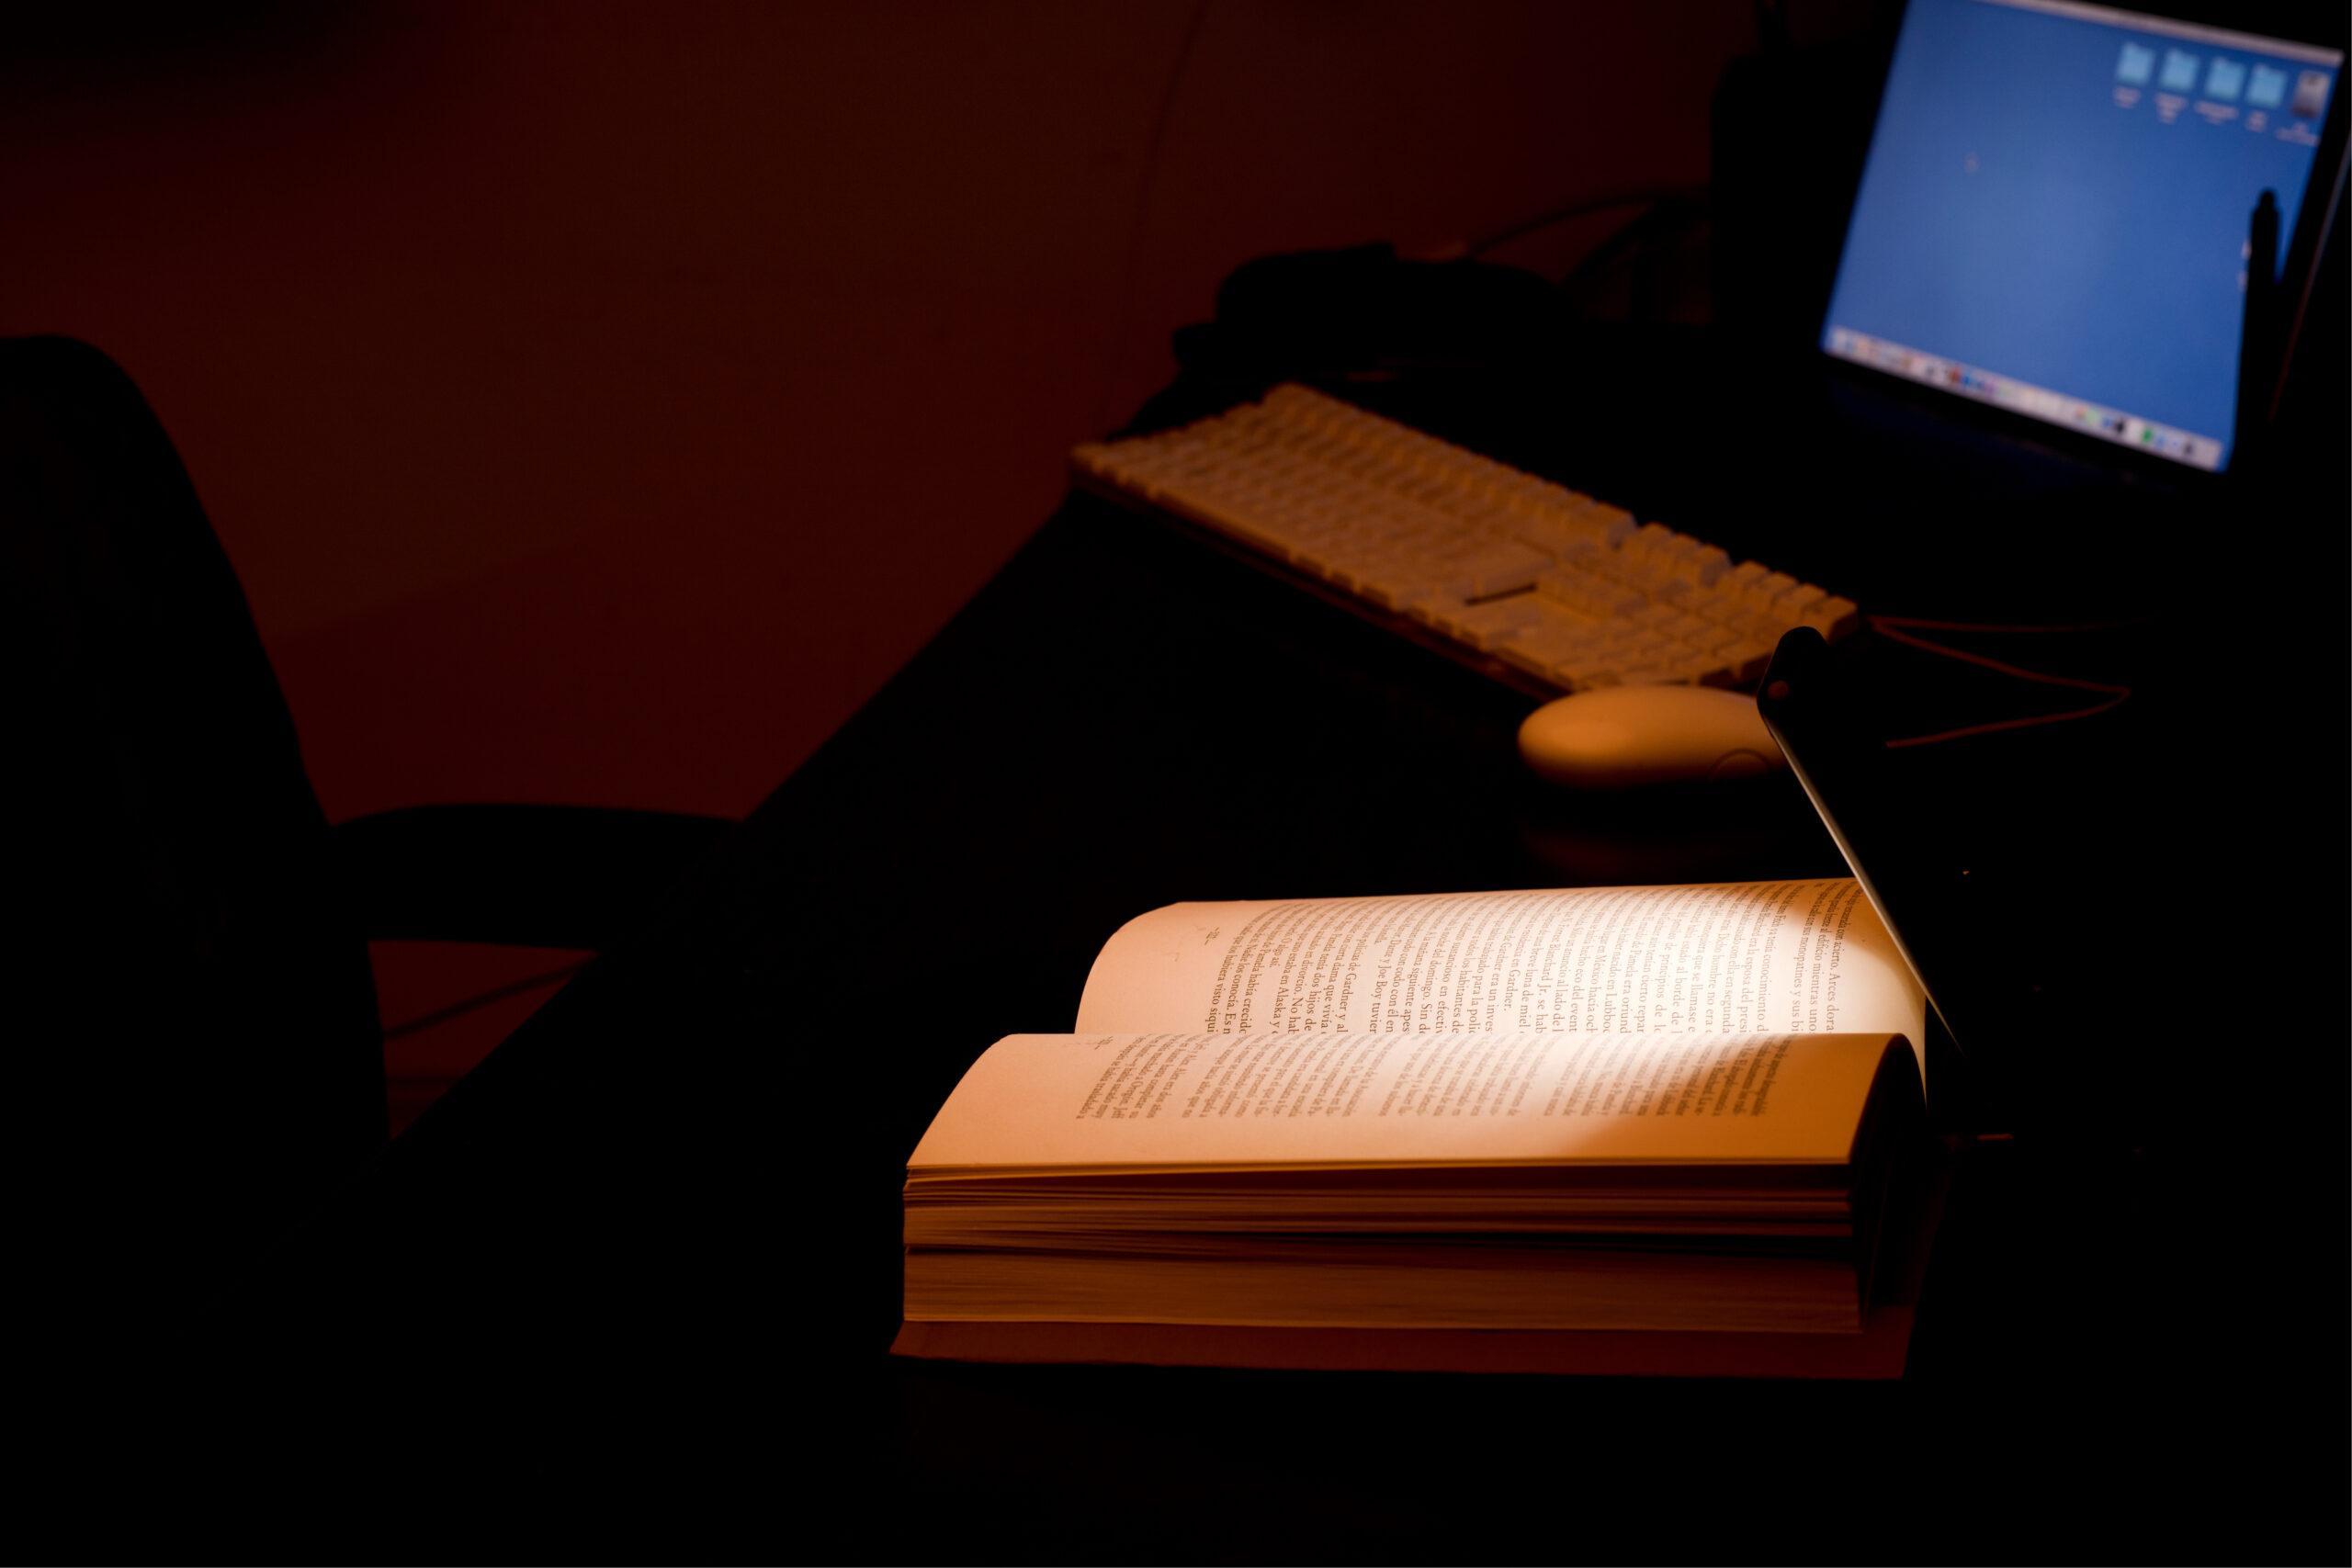 cell phone and power bank on the desk illuminates reading and st